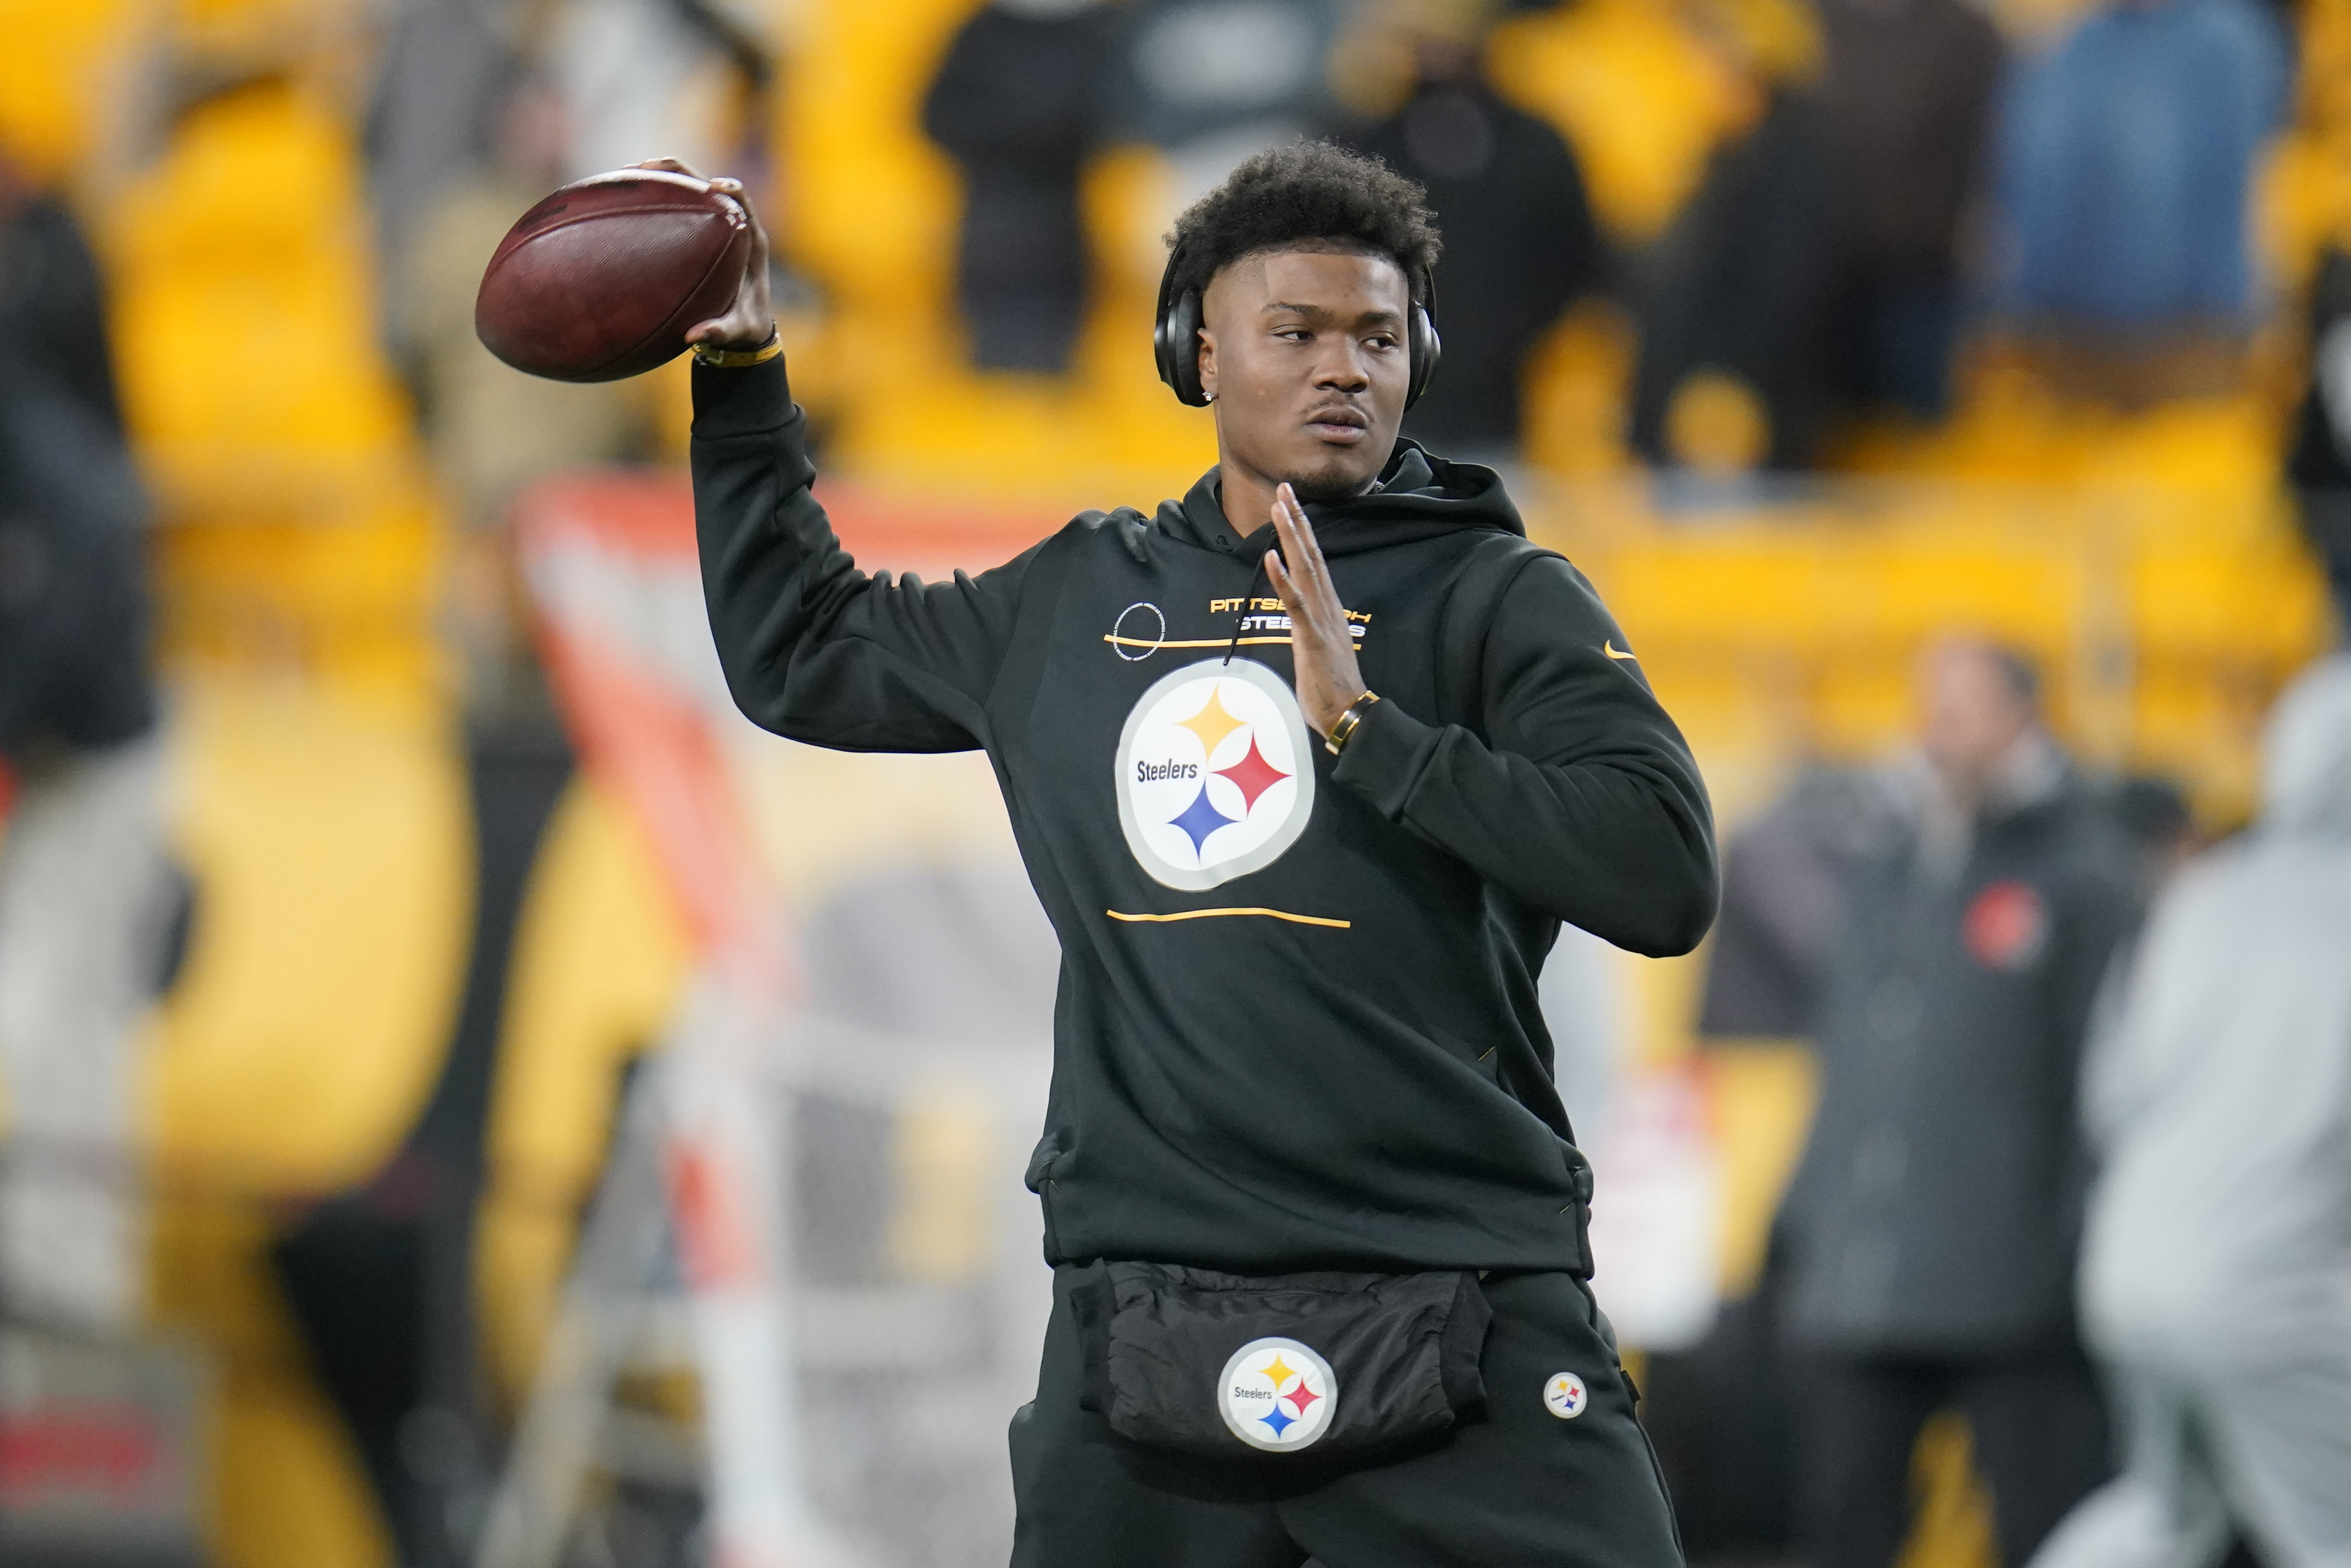 Steelers Rumors: Dwayne Haskins to Be Given RFA Tender Contract Worth Roughly $2.5M